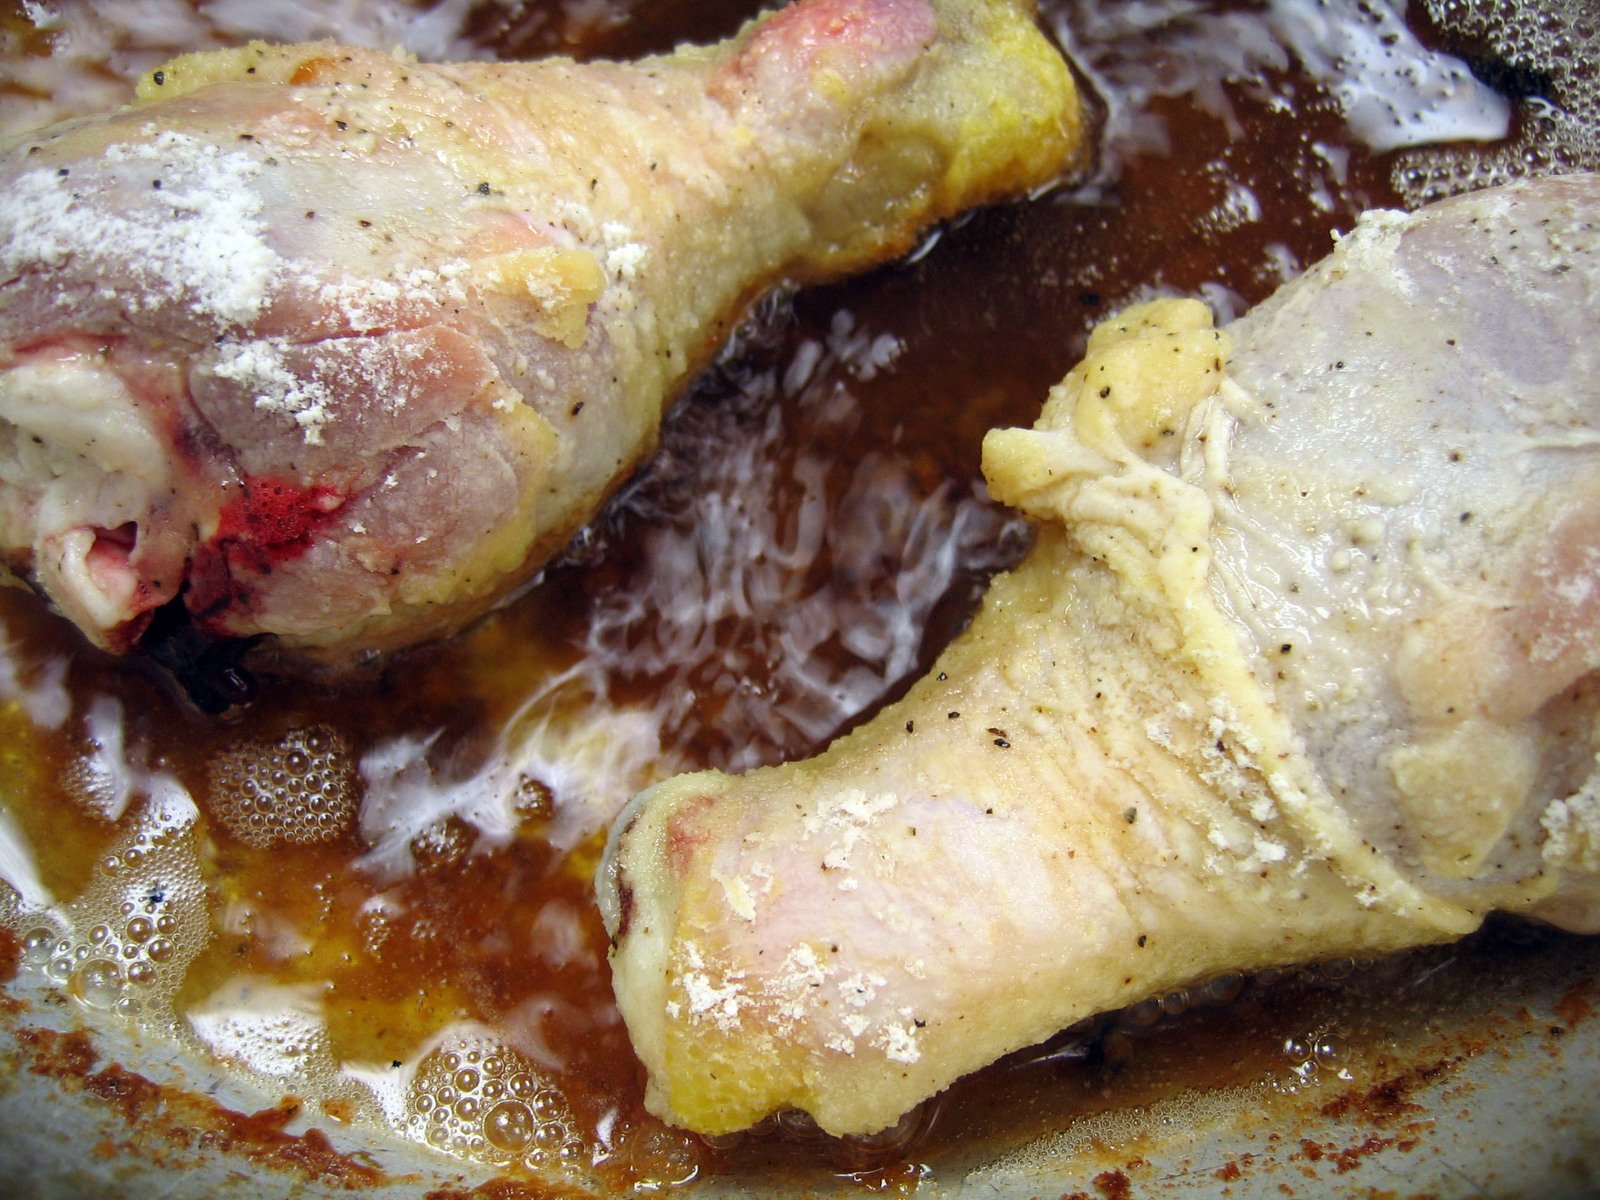 raw meats are simulating in sauce, including some brown